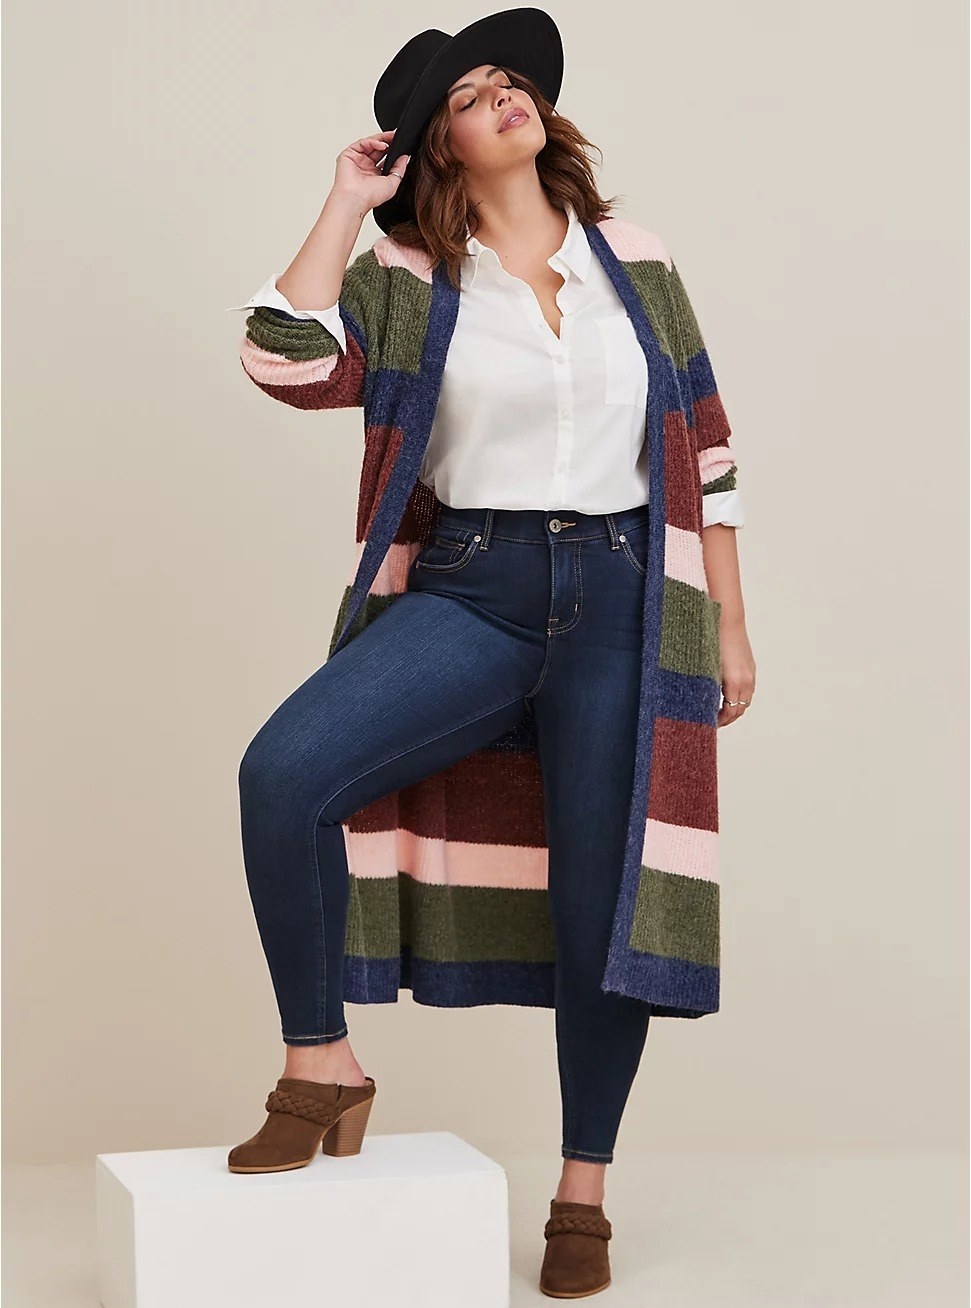 model posing in a long cardigan and jeans